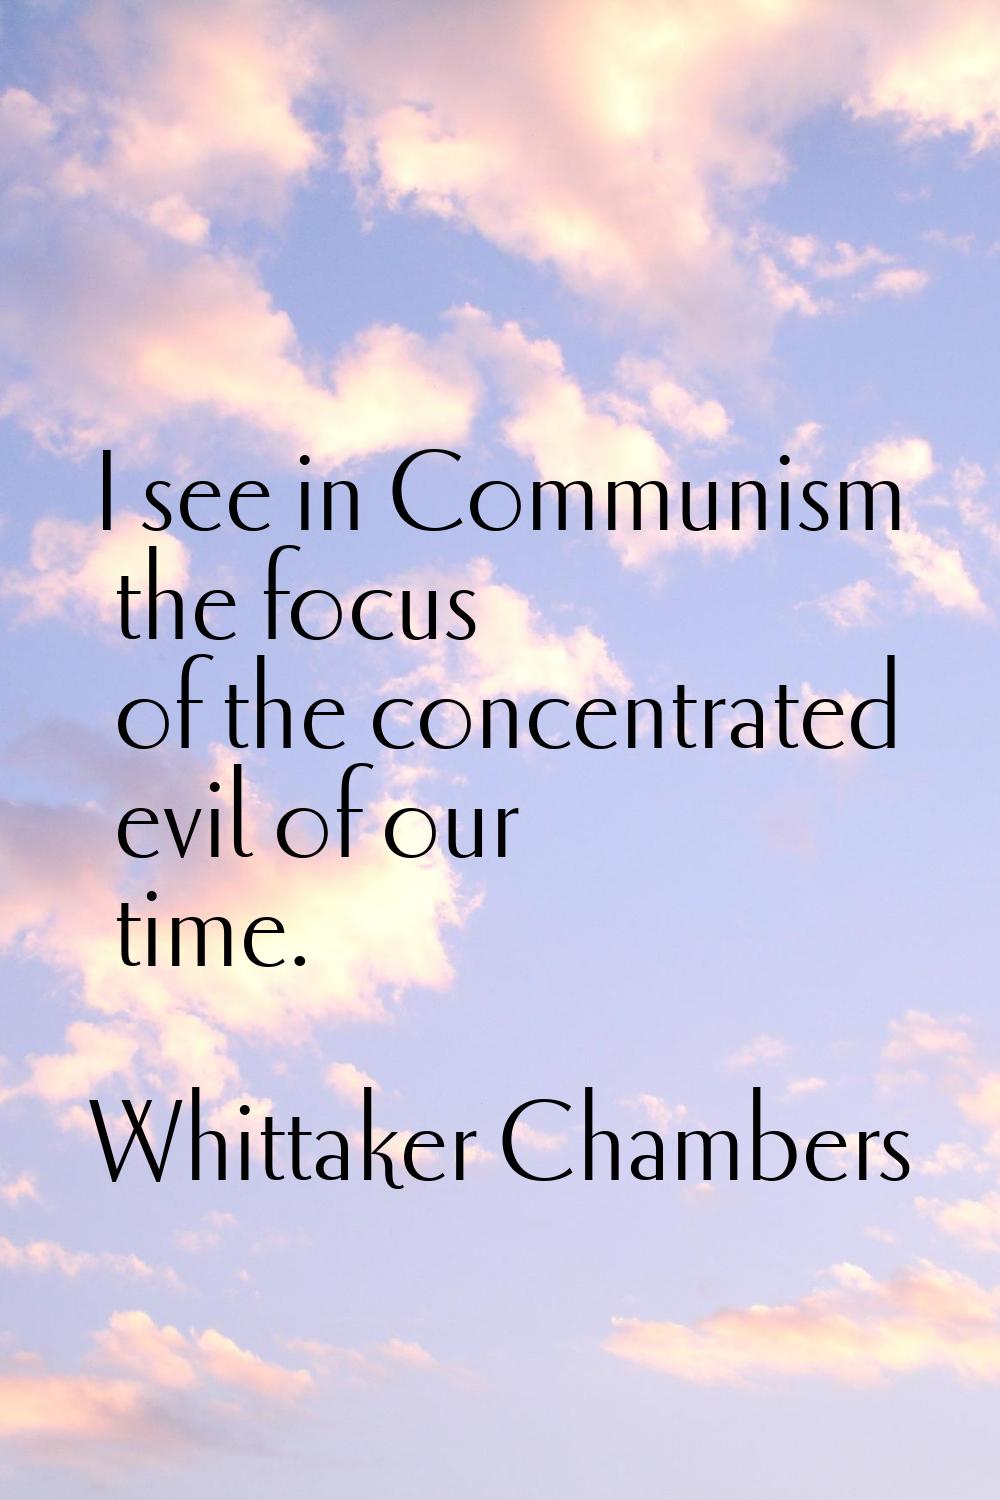 I see in Communism the focus of the concentrated evil of our time.